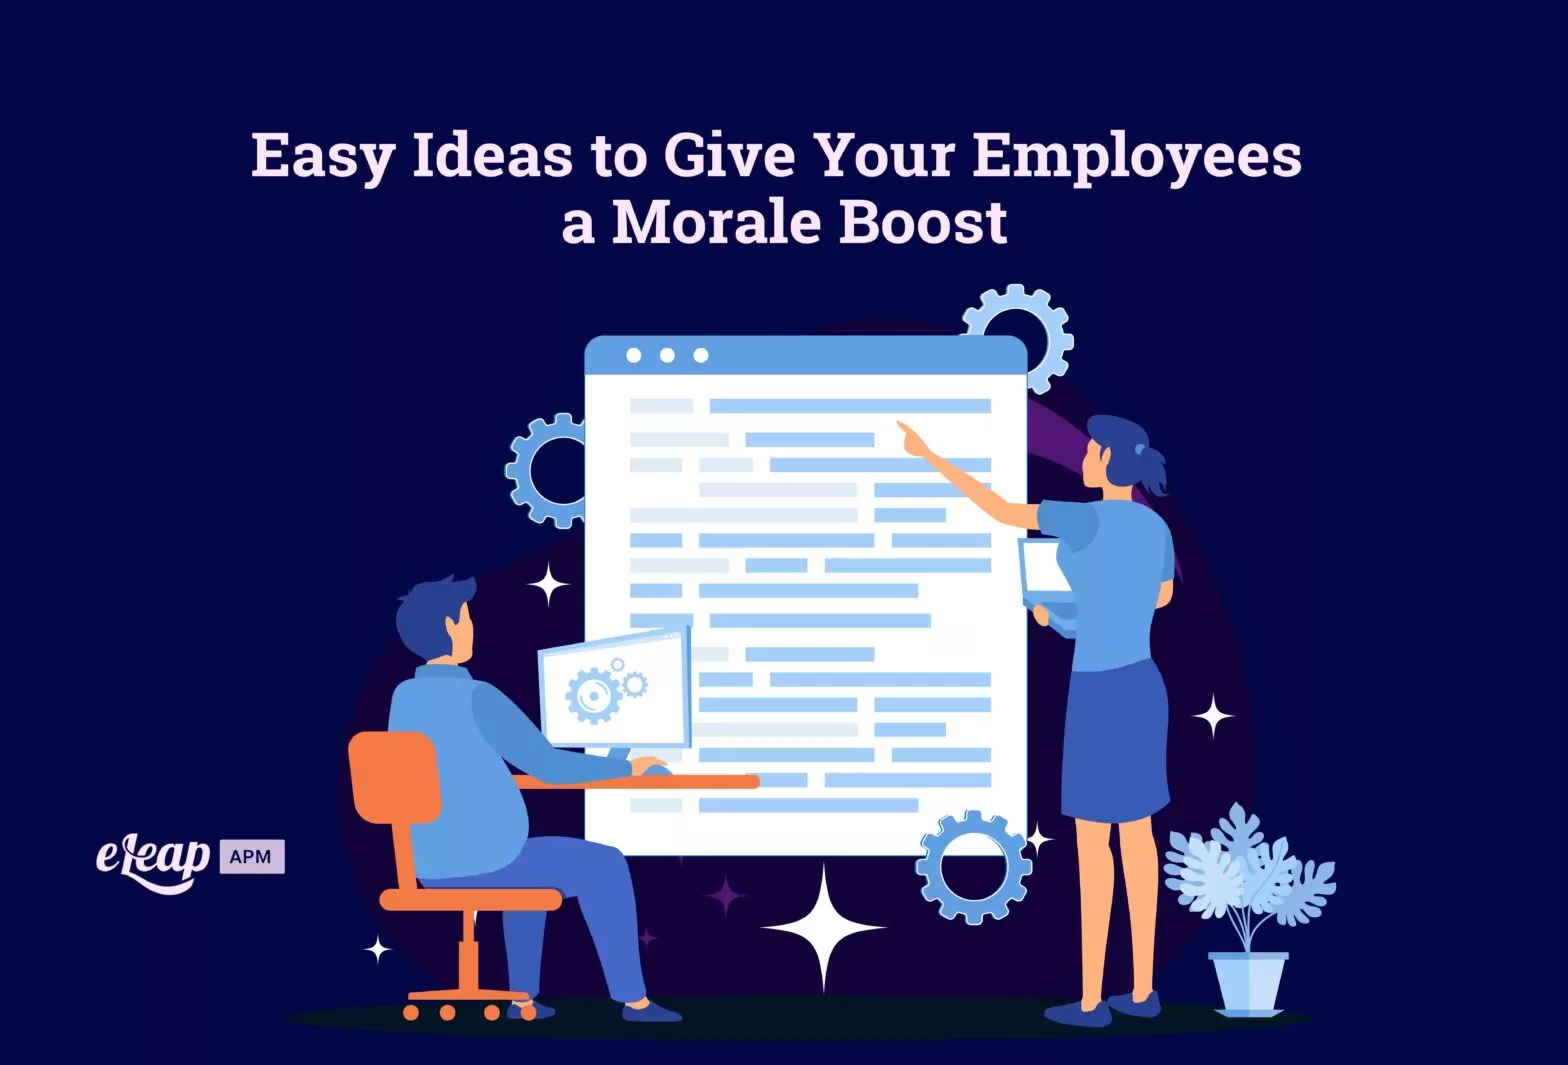 Easy Ideas to Give Your Employees a Morale Boost